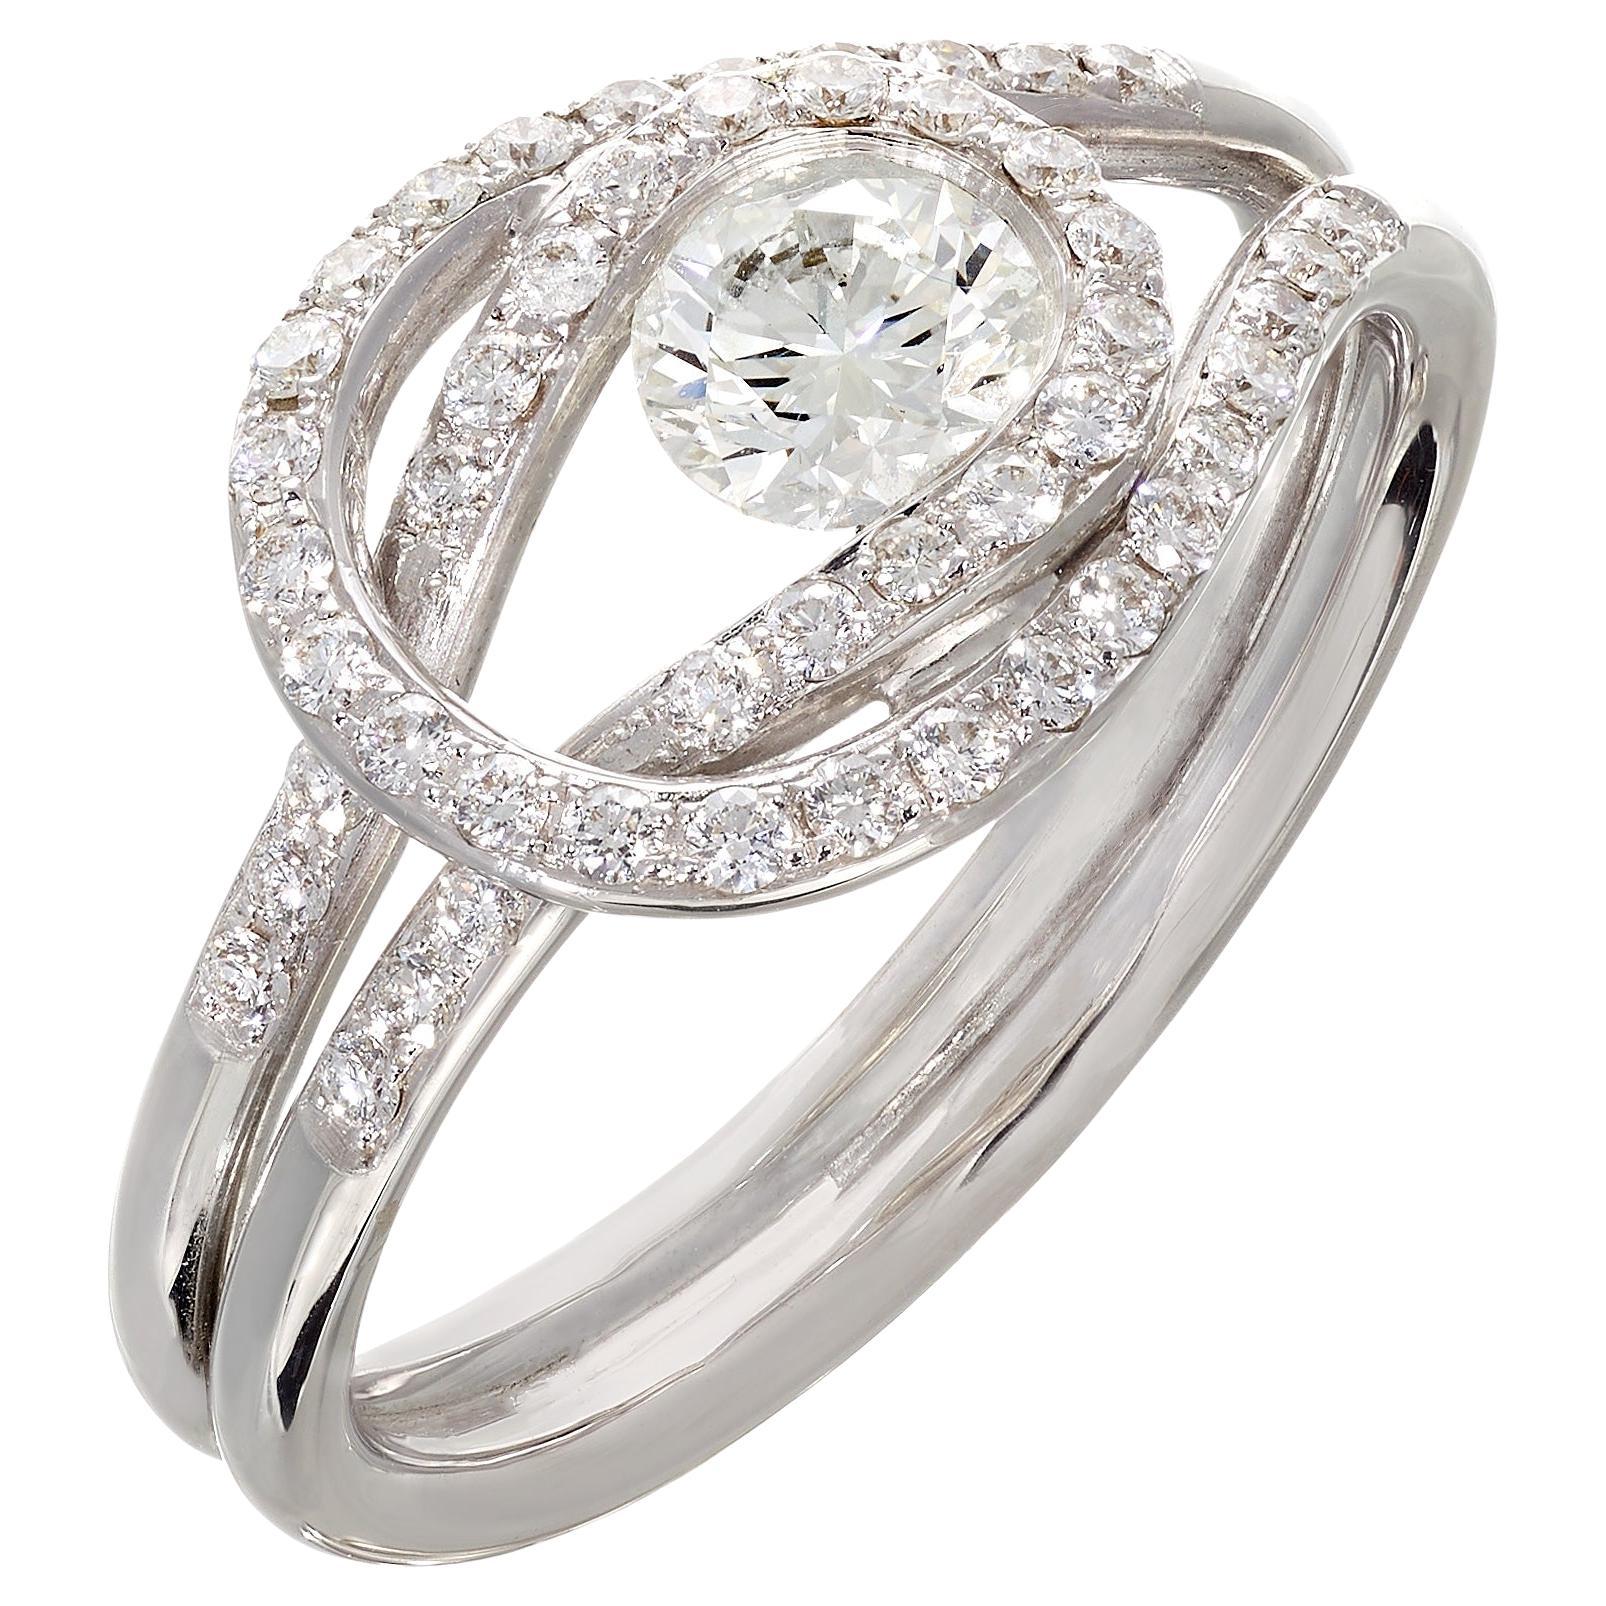 Rosior Round Cut, F Color, Vvs Clarity Diamond Engagement Ring Set in White Gold